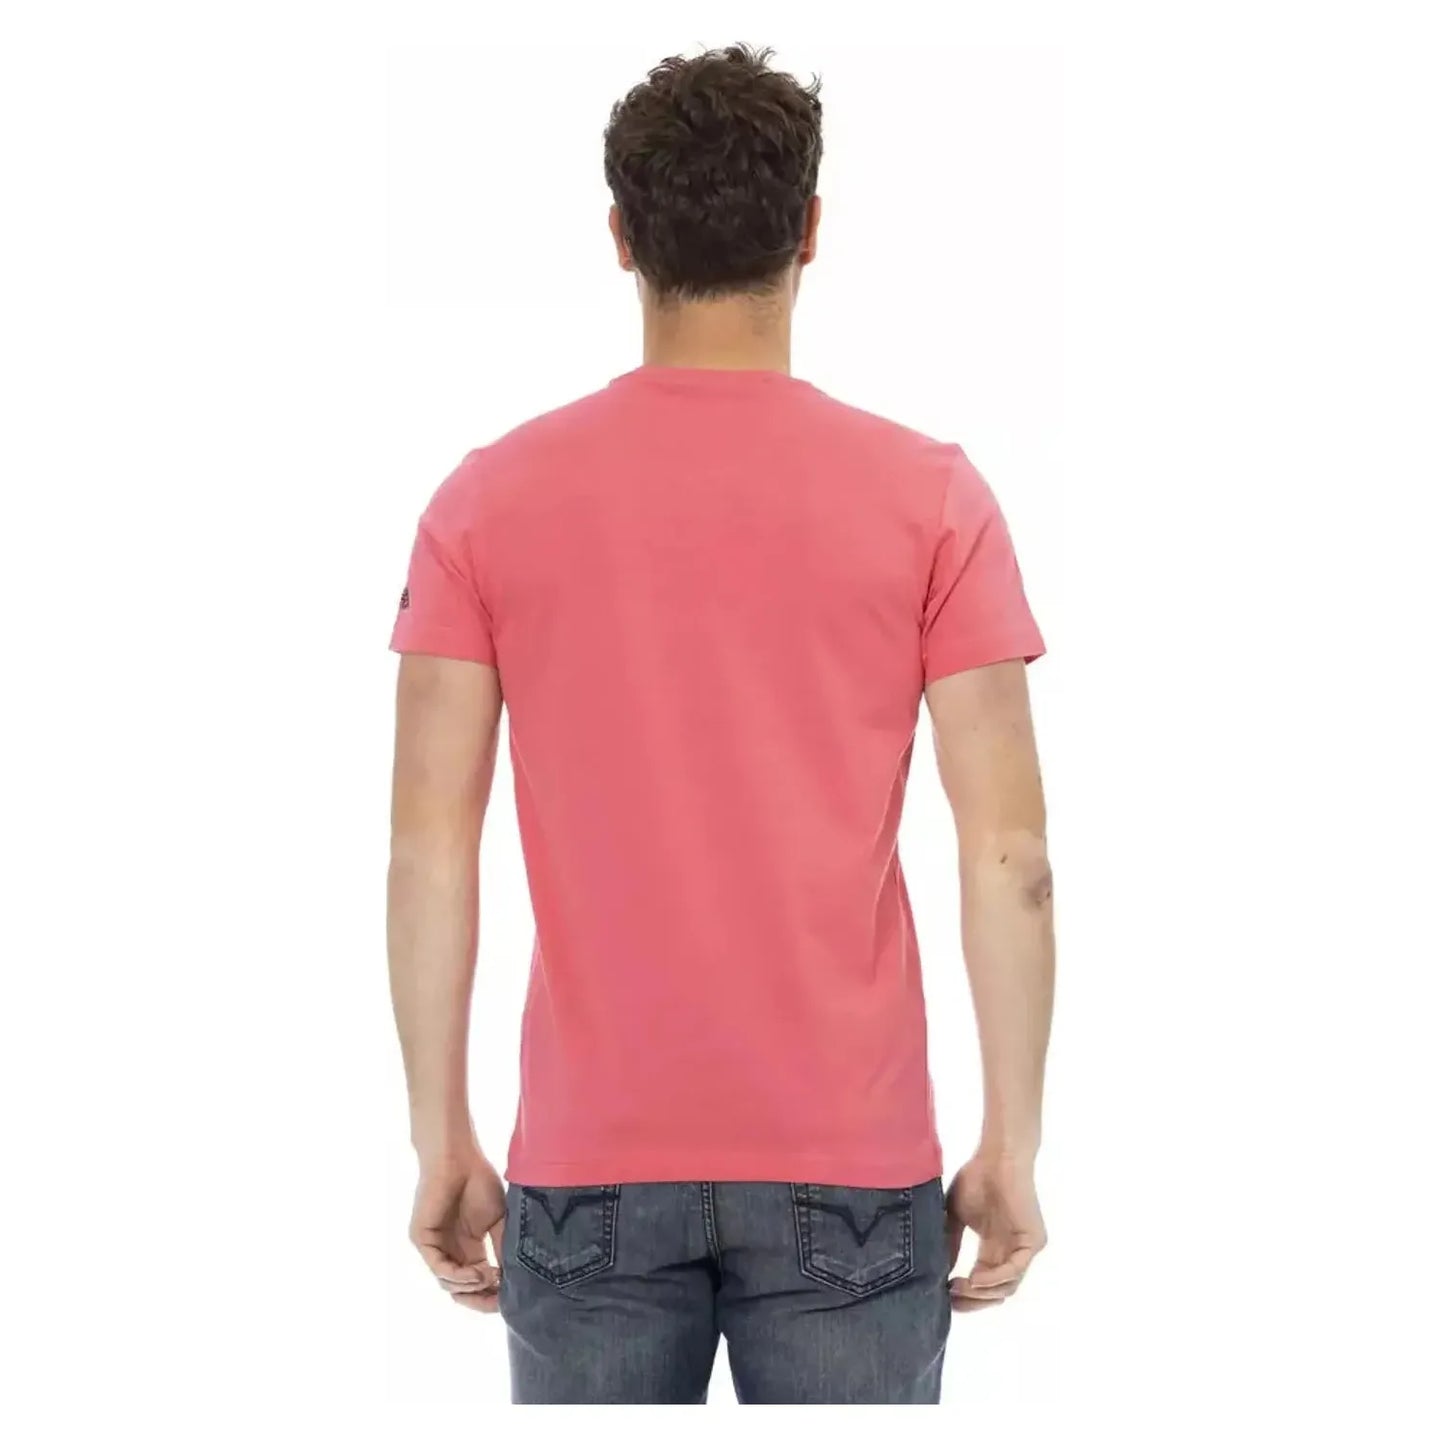 Trussardi Action Chic Pink Short Sleeve Tee with Unique Front Print pink-cotton-t-shirt-2